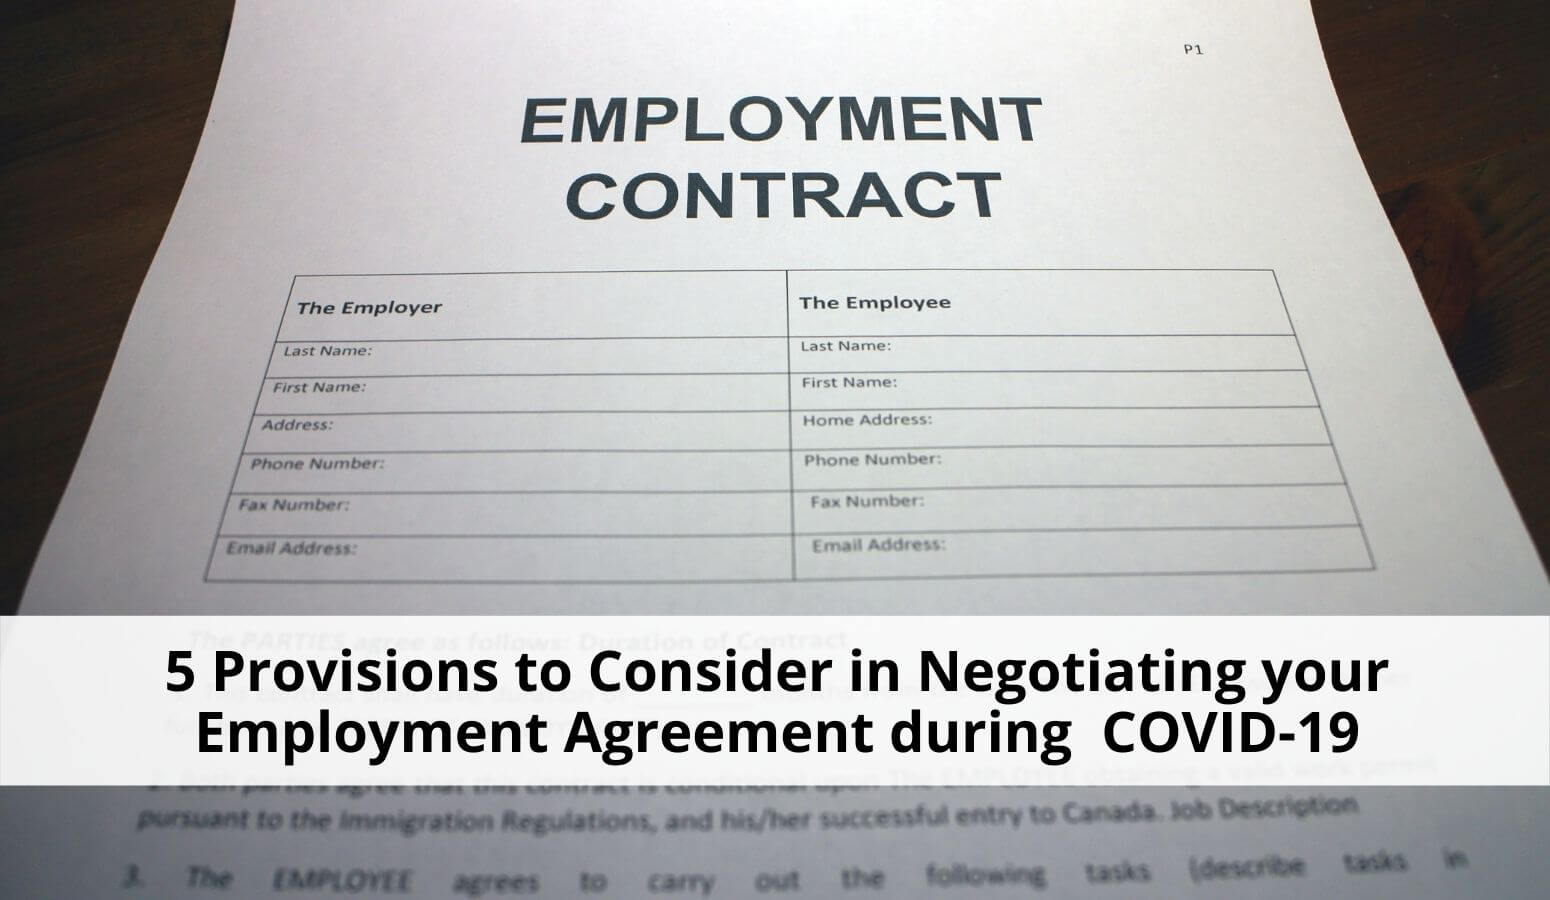 Featured image for “5 Provisions to Consider in Negotiating your Employment Agreement during  COVID-19”